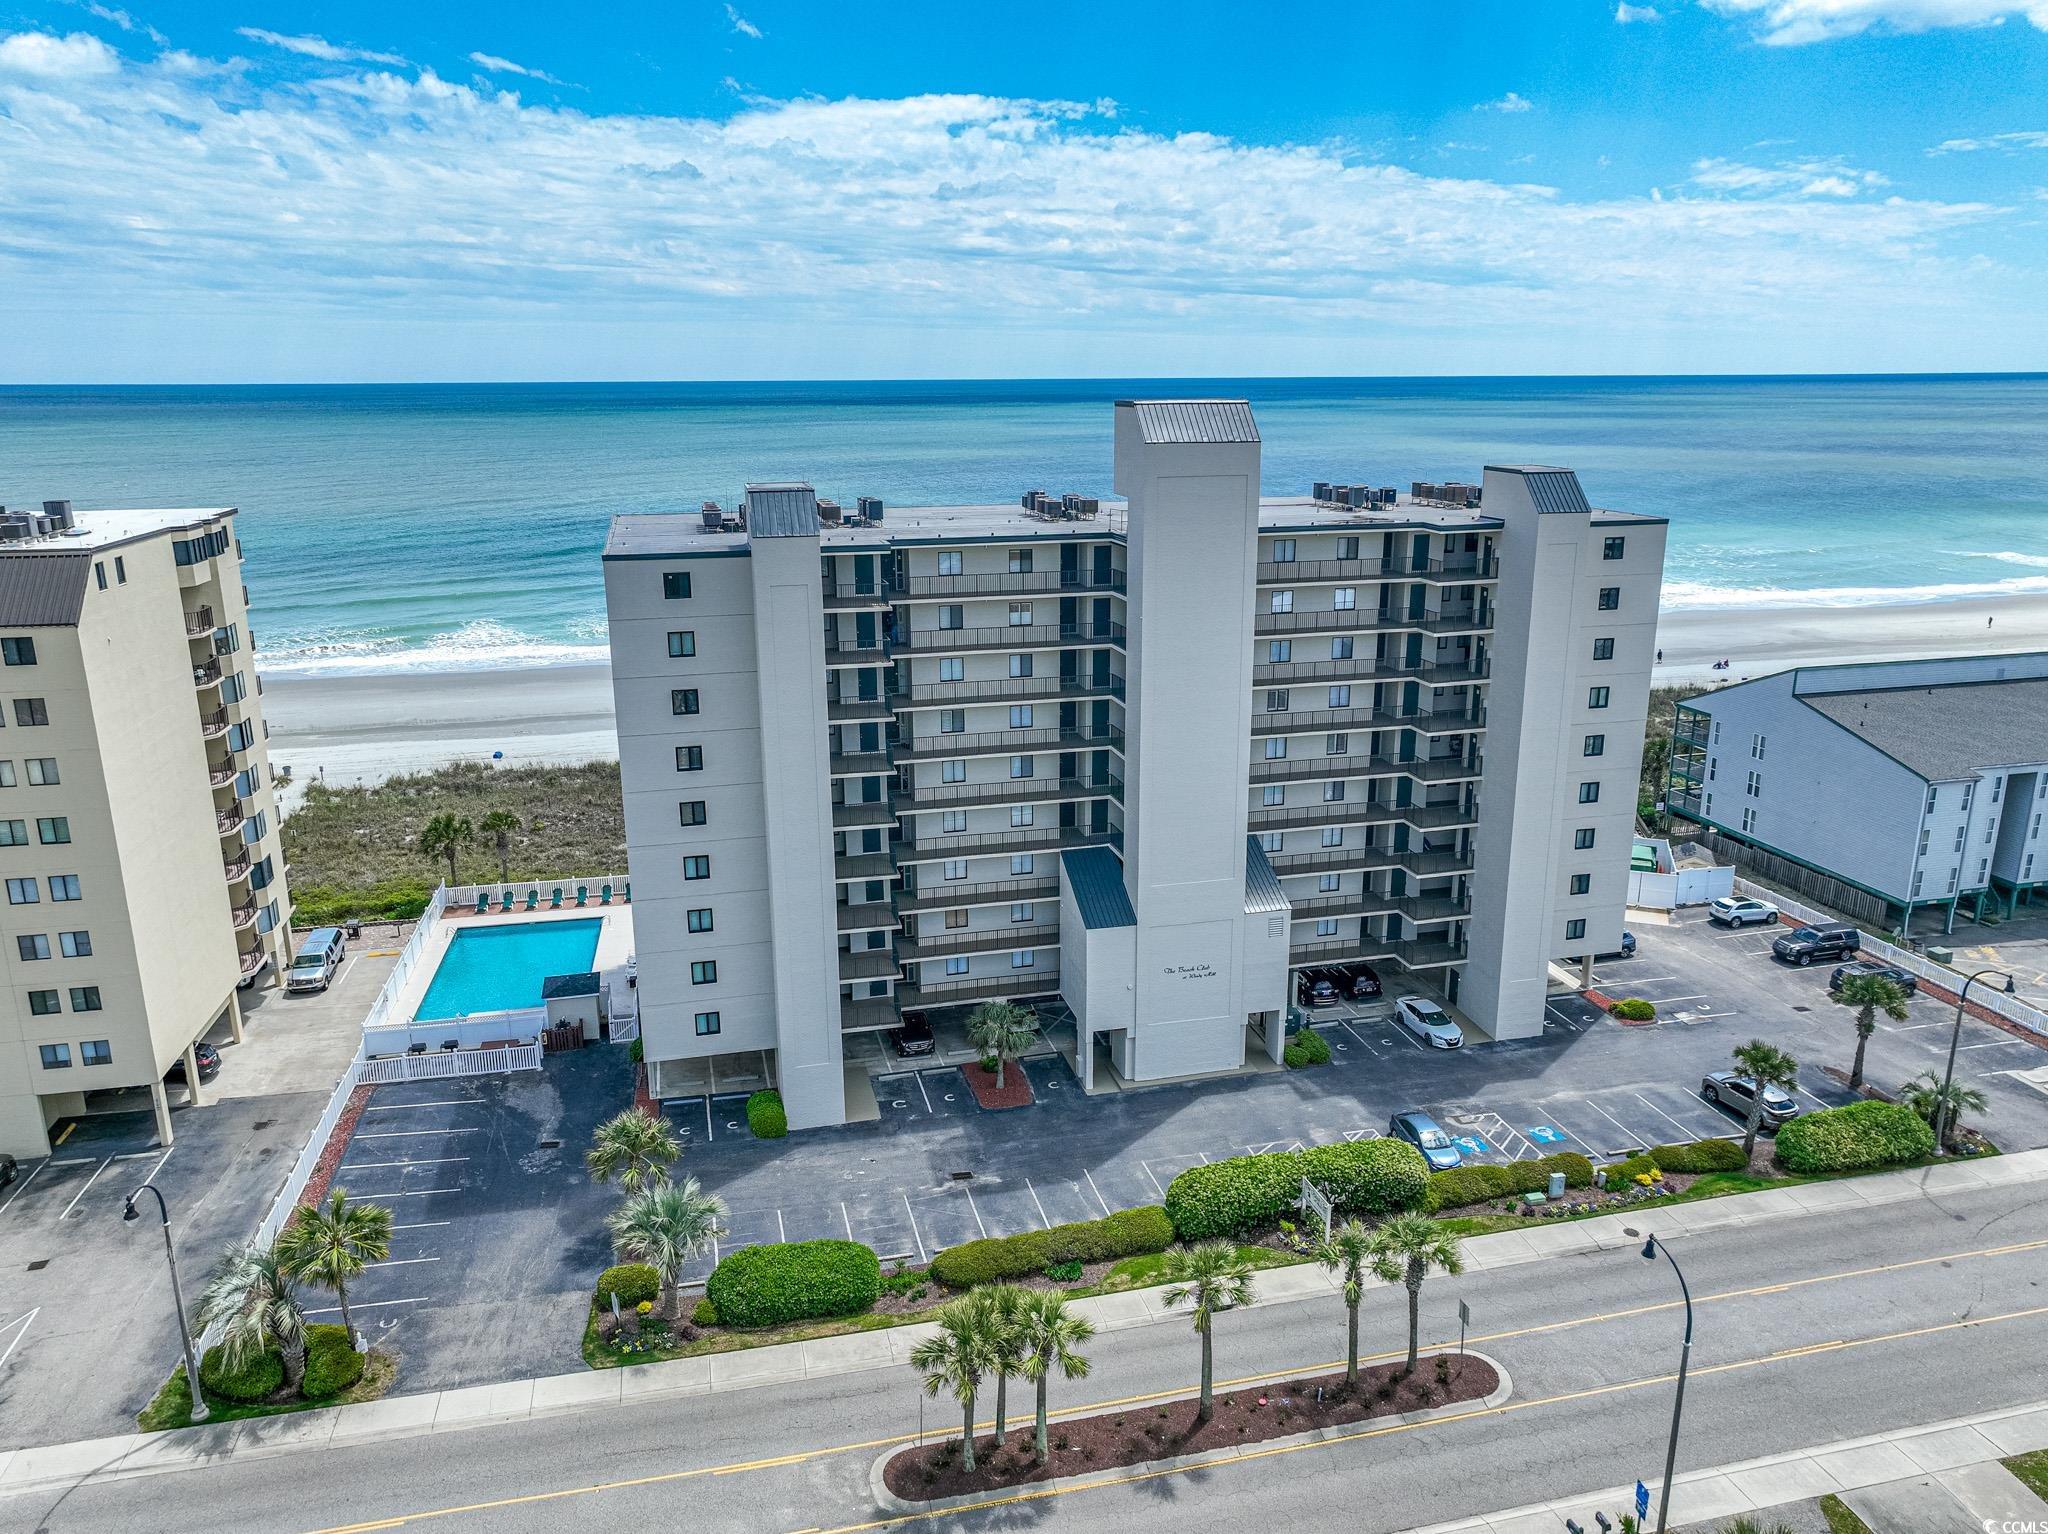 magnificent views of the beach from this oceanfront, fifth floor end unit. fully furnished four bedrooms, three baths, in beach club in the highly sought after windy hill section of north myrtle beach. enjoy breathtaking sunrises and sunsets from cherry grove to myrtle beach with the 180-degree panoramic views from the balcony. enter the unit through a sizable foyer with sitting area and lockable managers closet. you will immediately take note of the professsionally decorated unit with all furniture conveying.  tile and lvp flooring throughout. the kitchen boasts soft close white upper cabinets, pull out drawers for lowers, slate matte appliances, granite counters and backsplash, undercabinet lighting, a pantry, and a grand breakfast bar. spacious living room dining room combination with ceiling fan, chandelier, and large picture windows with views of the beach and a fold out sofa- this unit can comfortably sleep 10. the oceanfront primary bedroom has a ceiling fan, balcony access, walk-in closet, and a private bath with double vanity, whirlpool tub, and a stand-up shower. bedroom number two has a ceiling fan and its own private bath with vanity and a shower tub combination. bedrooms three and four have ceilings fans and share a "jack & jill" style bathroom that also has access from the hallway. other features include plantation style shutters, 60-gallon hot water heater with boosters, and laundry room with washer and dryer and shelving. beach club just had a million dollar exterior waterproofing and reskinning with overflow parking across the street and offers coded access to the elevator, private walkway to the beach, outdoor community pool, and much more. current owners have never rented the unit- it will make a fantastic primary , vacation home, or investment unit and beach club is located near shopping, dining, entertainment, hospitals, and the airport. square footage is approximate and not guaranteed. buyer responsible for verification.